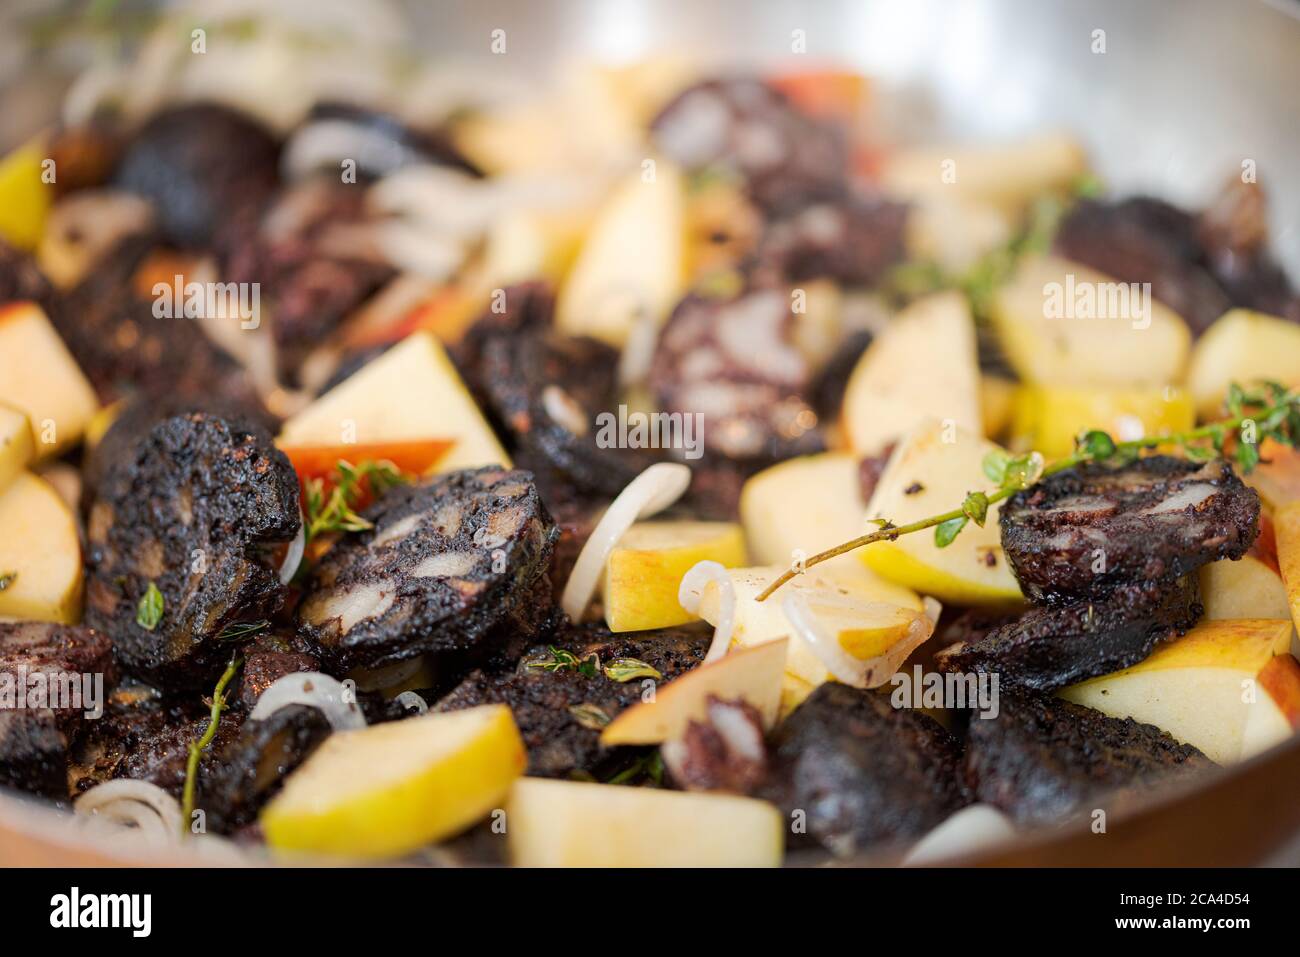 https://c8.alamy.com/comp/2CA4D54/full-frame-slices-of-blood-sausage-and-apples-mixed-with-onions-and-herbs-like-thyme-sizzling-in-large-frying-pan-2CA4D54.jpg